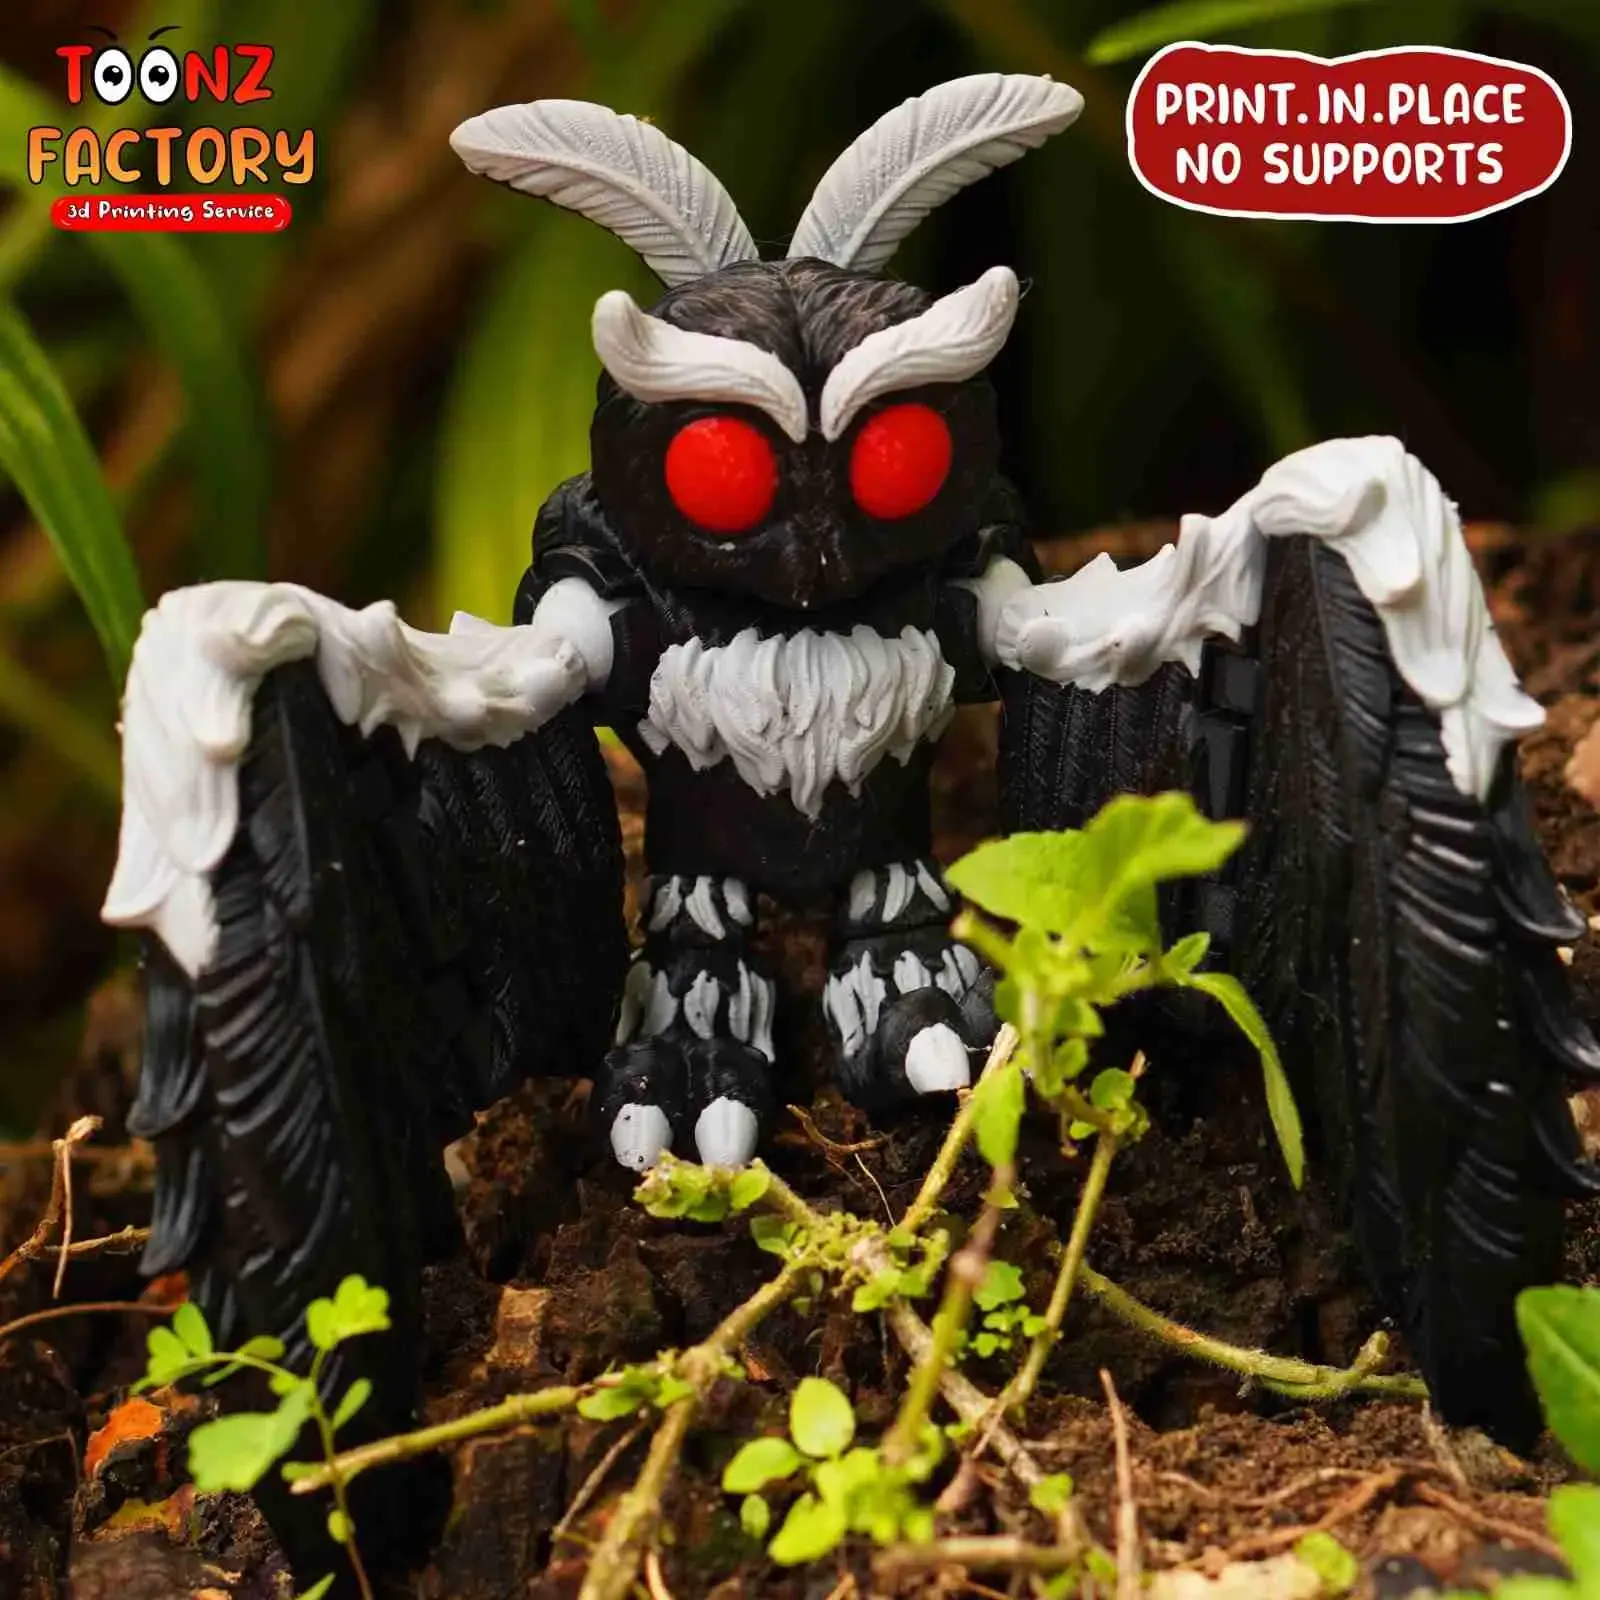 PRINT-IN-PLACE FLEXI MOTHMAN ARTICULATED